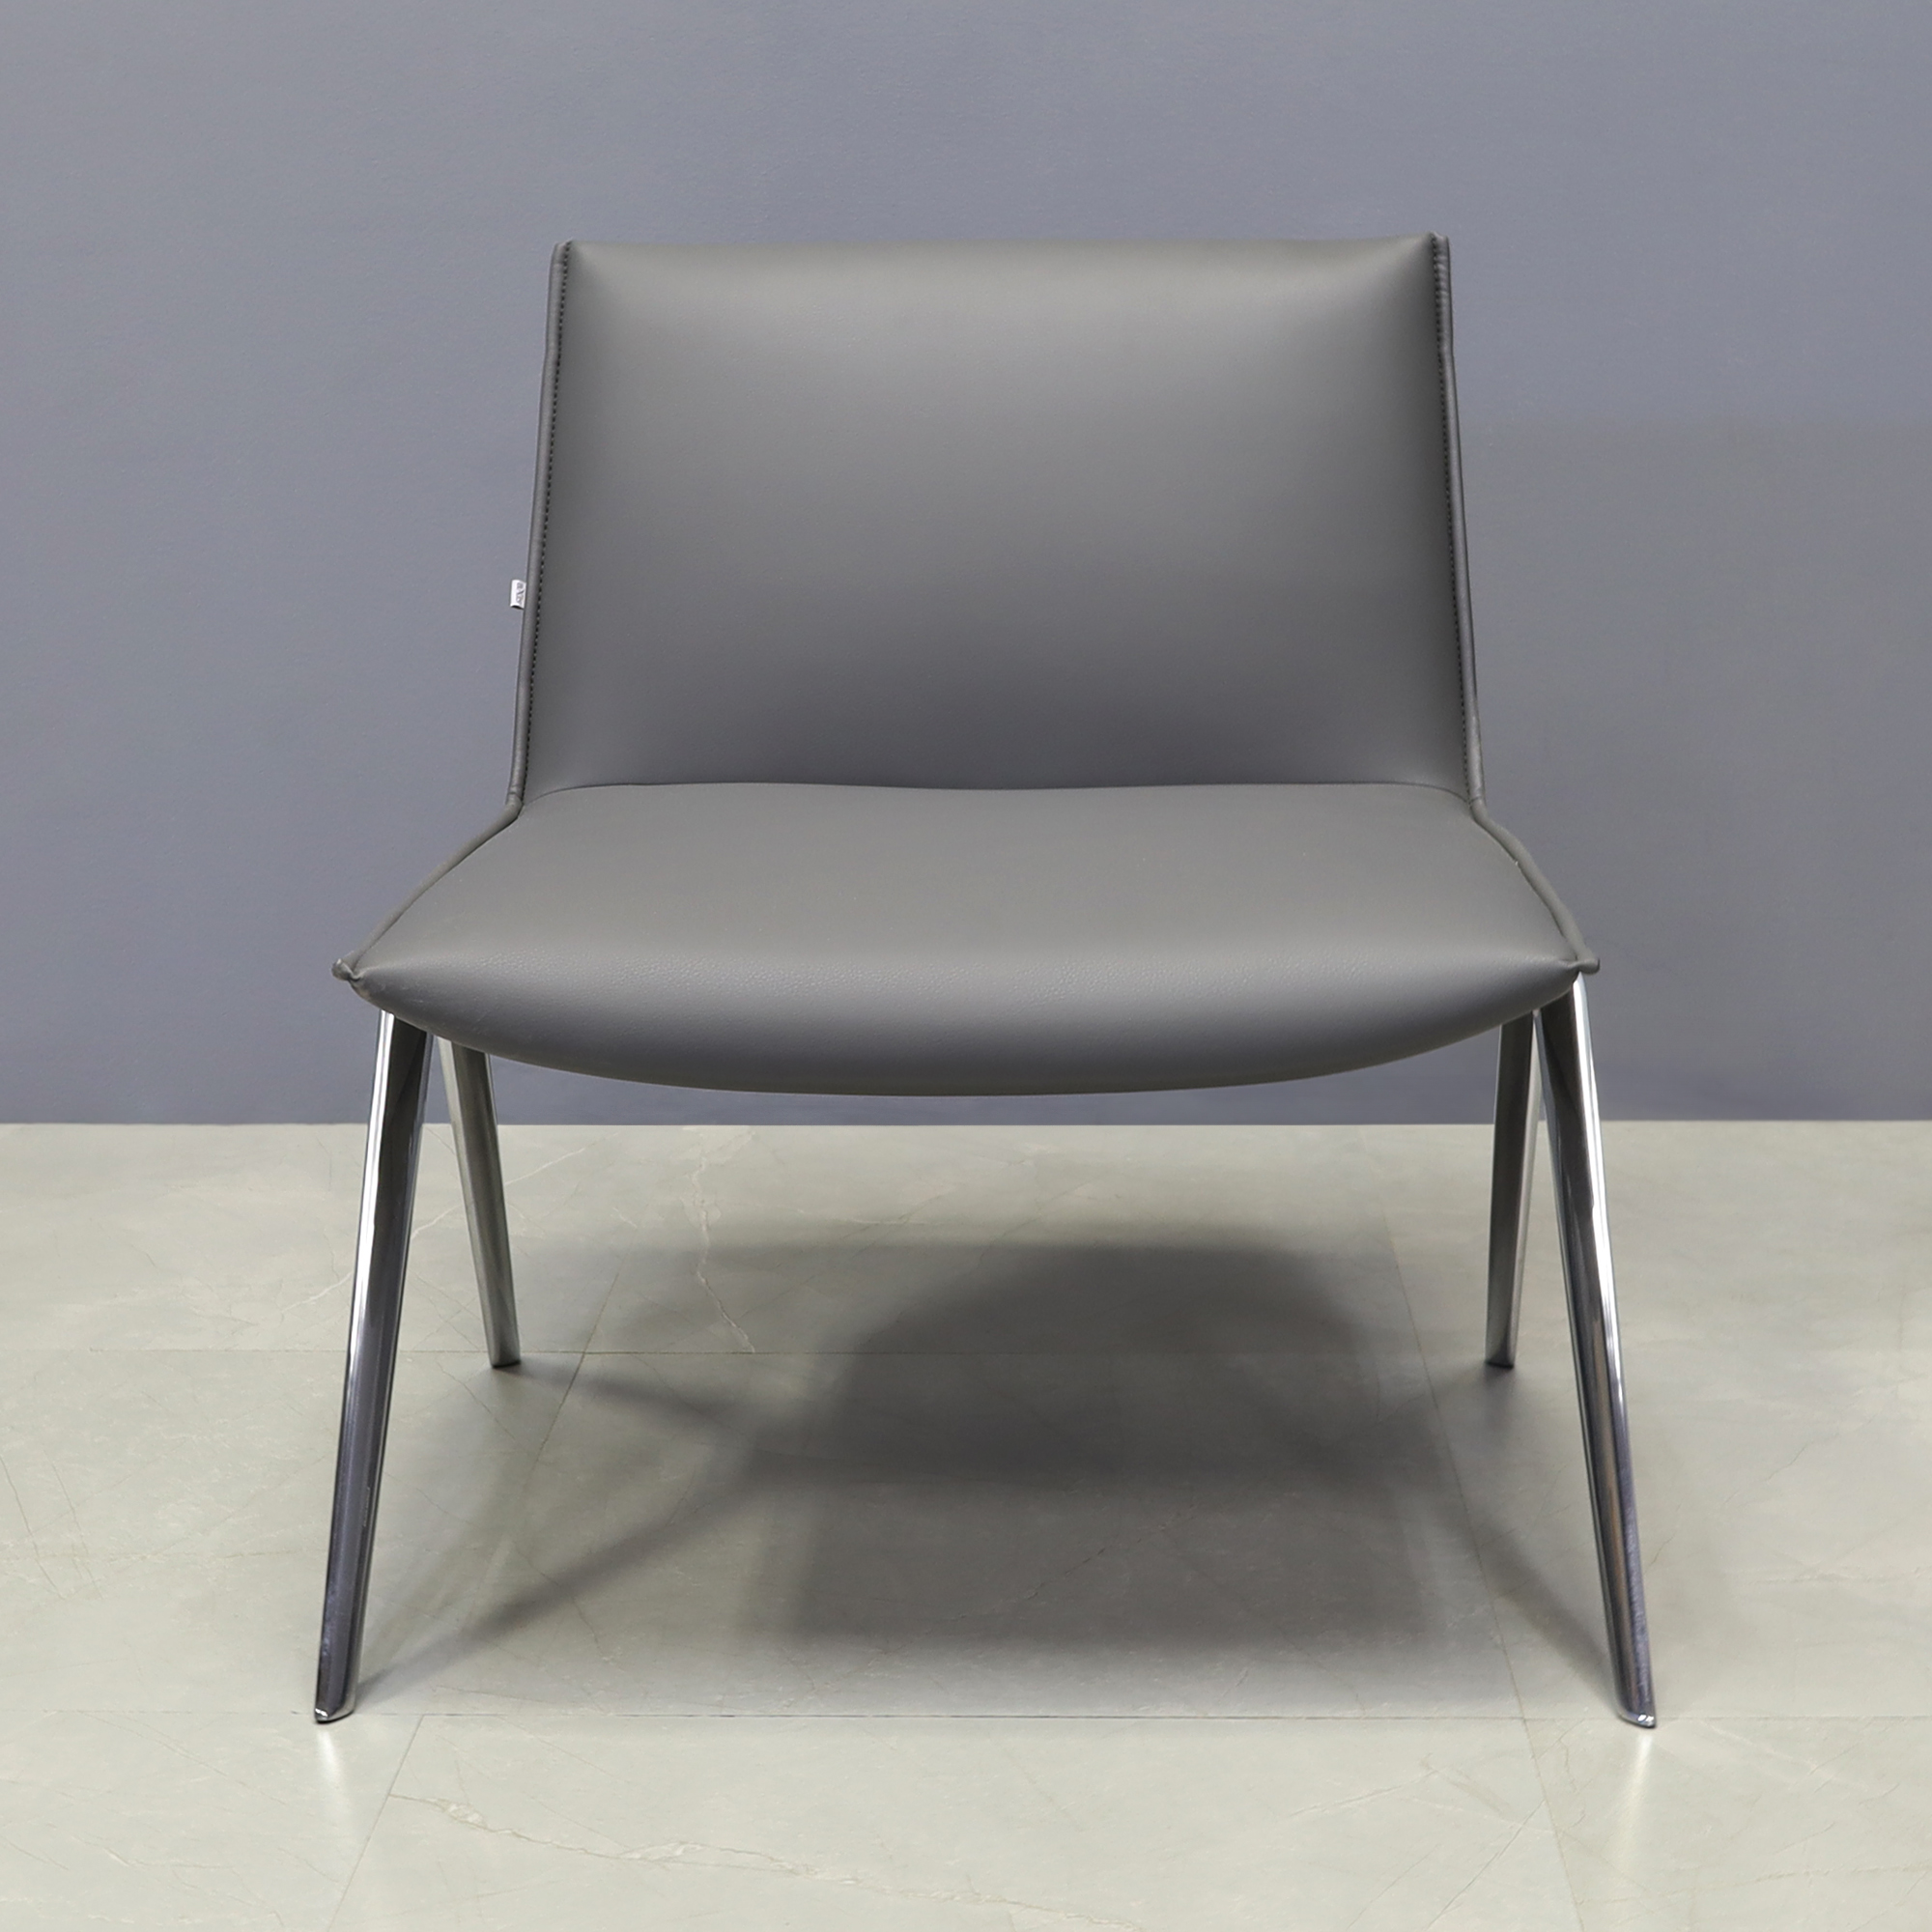 Monterra Lobby Chair in gray leatherette, shown here.